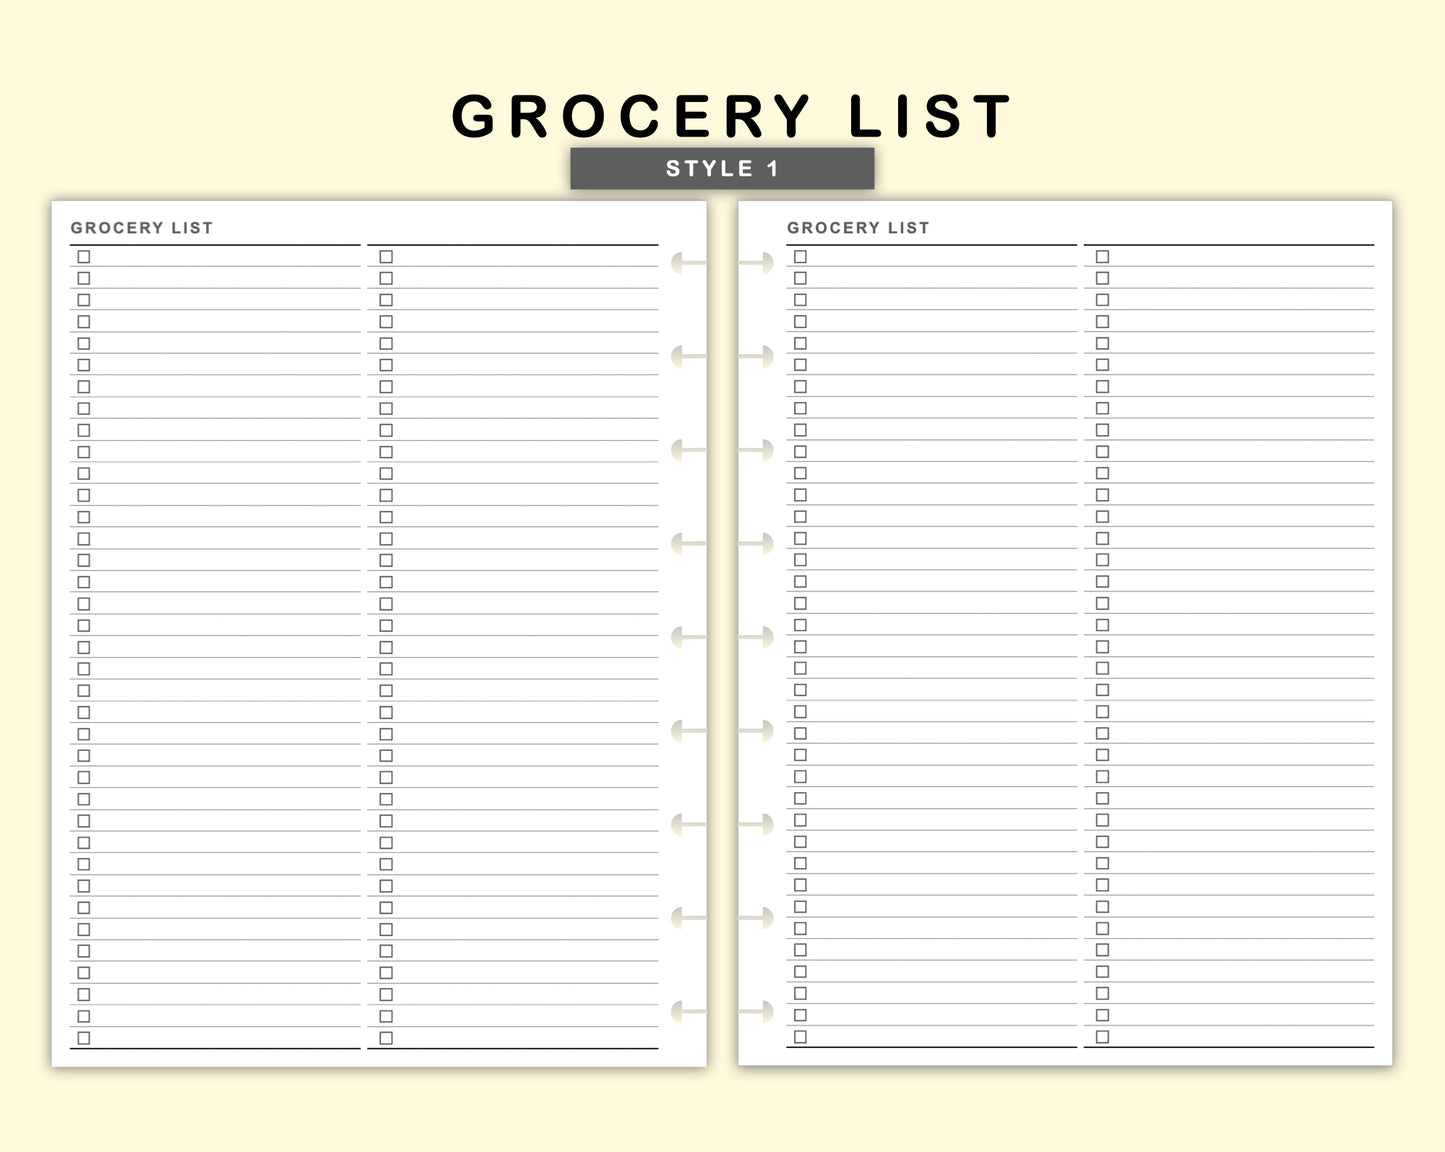 Classic HP Inserts - Grocery List